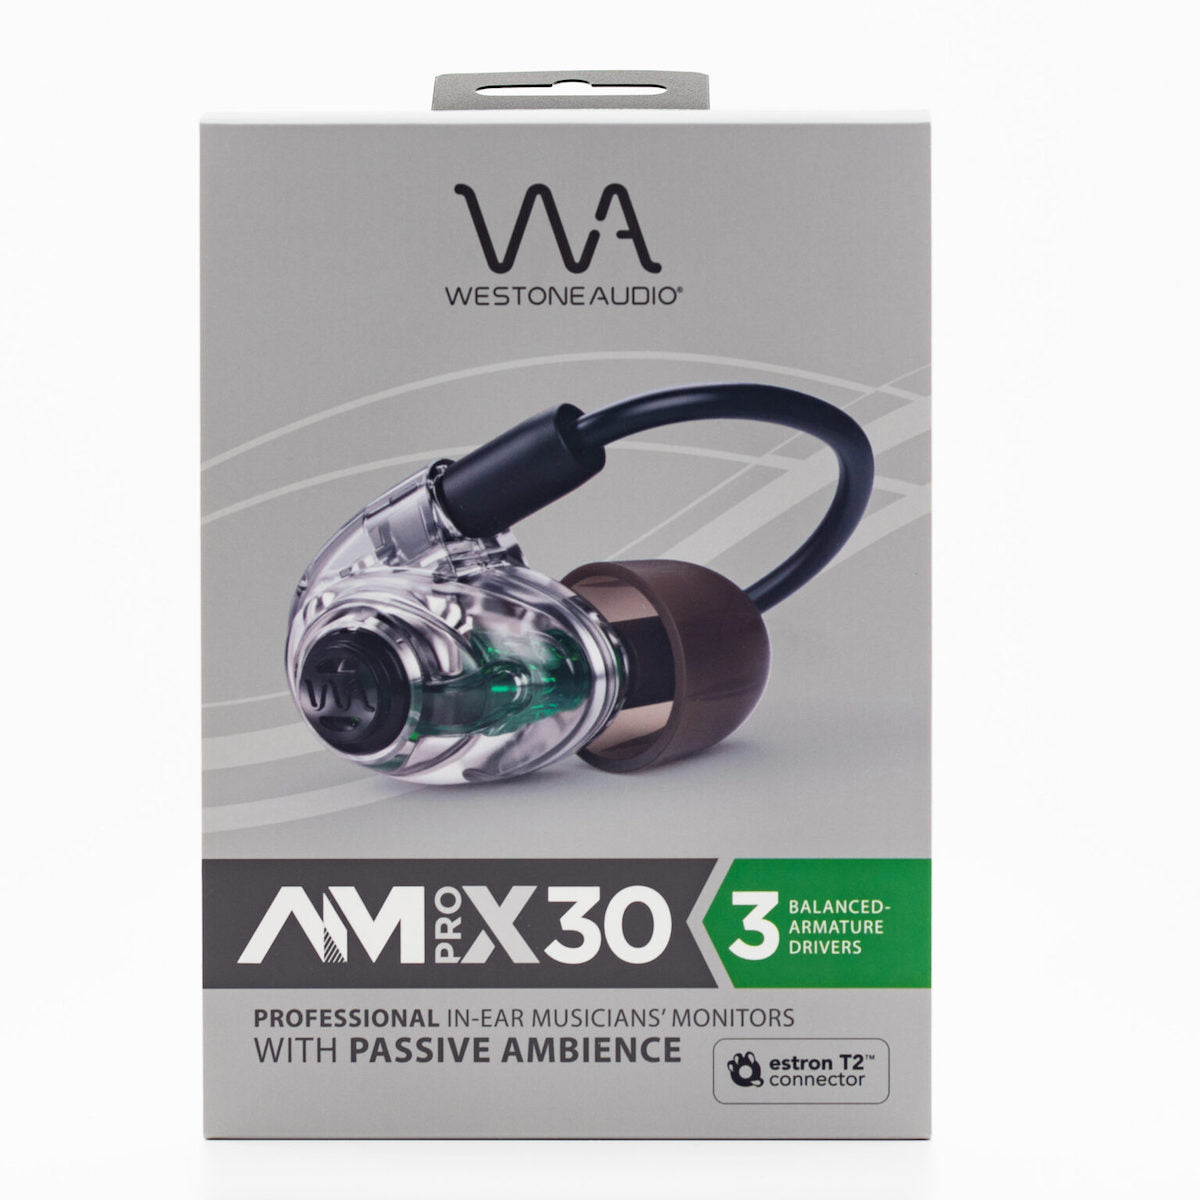 Westone AM Pro X30 - Triple-Driver Musician IEM with Passive Ambience